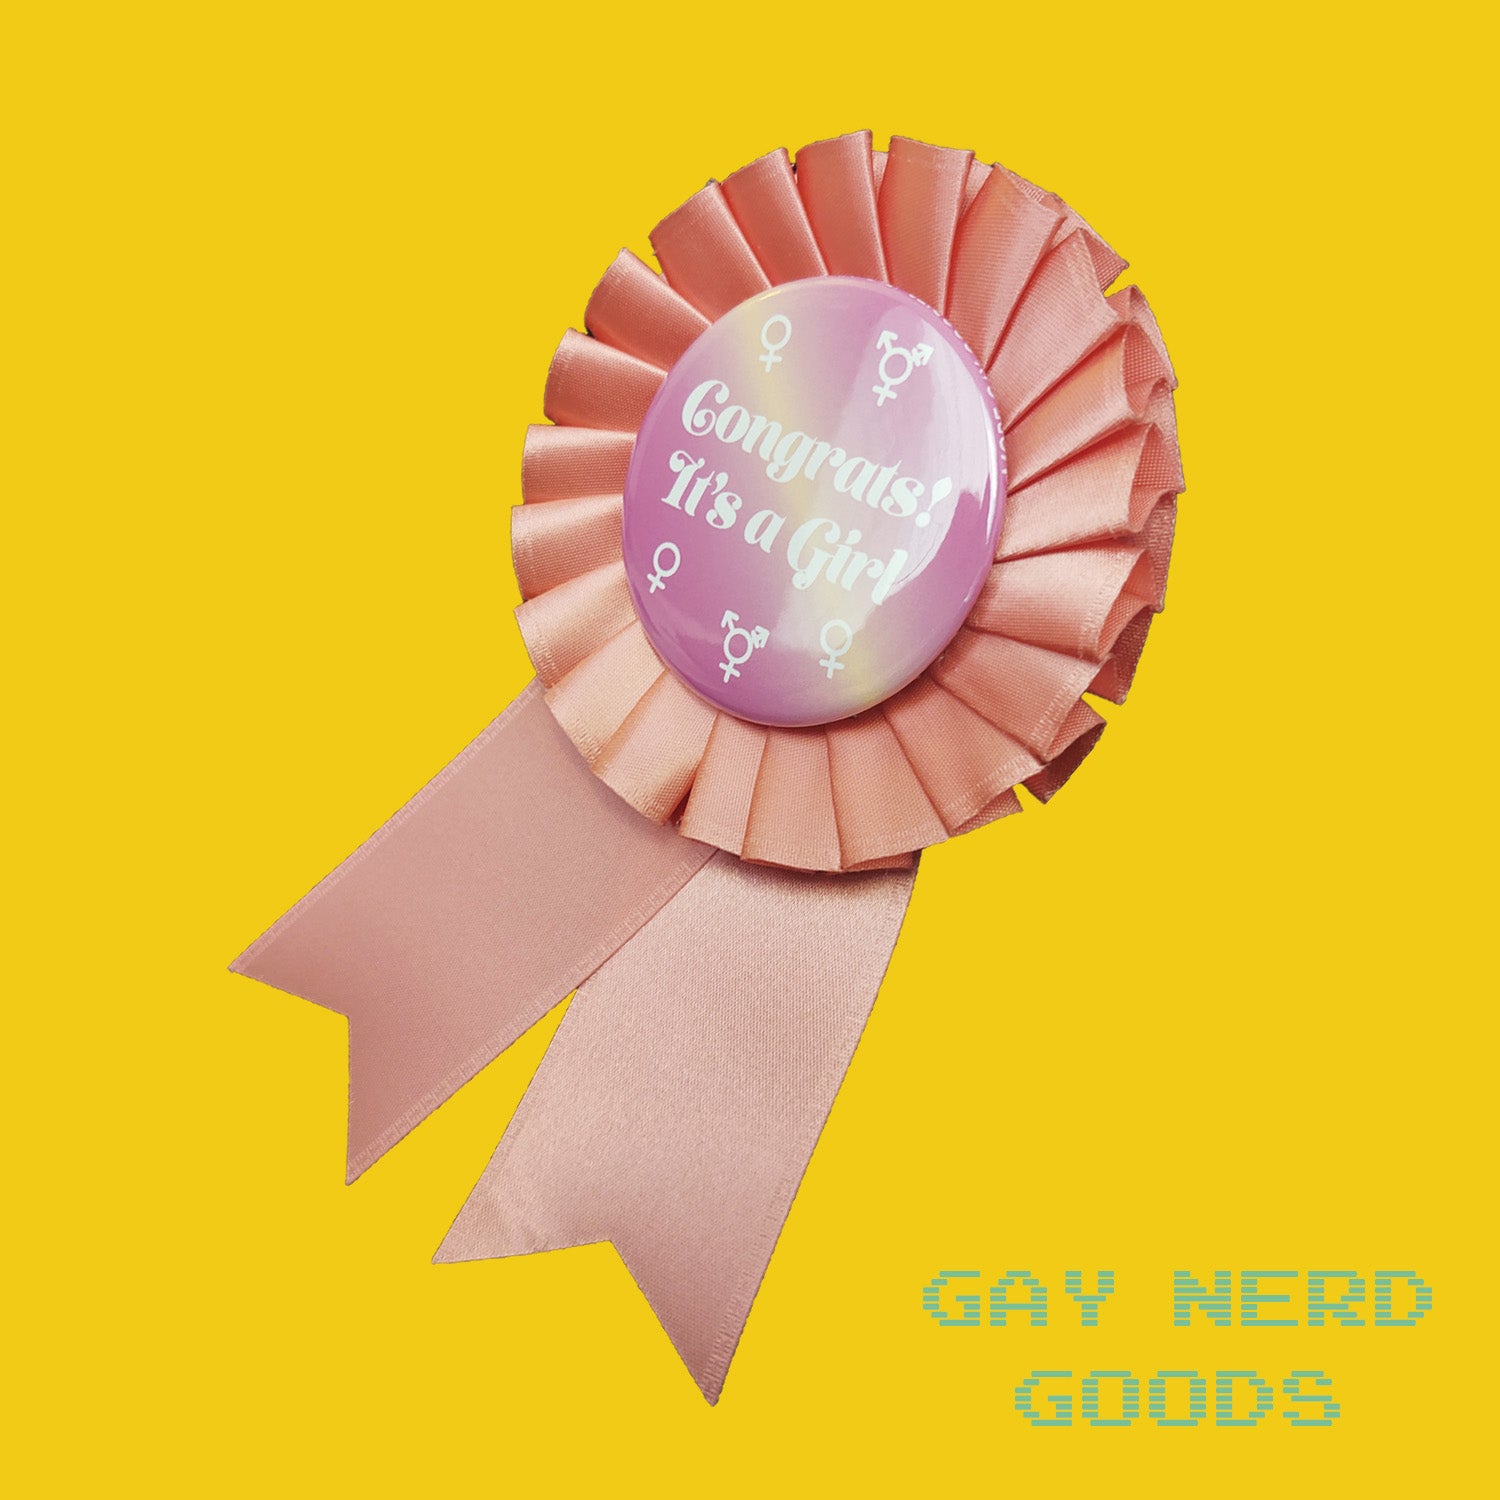 side view of the "congrats it's a girl" gender reveal rosette on a yellow background